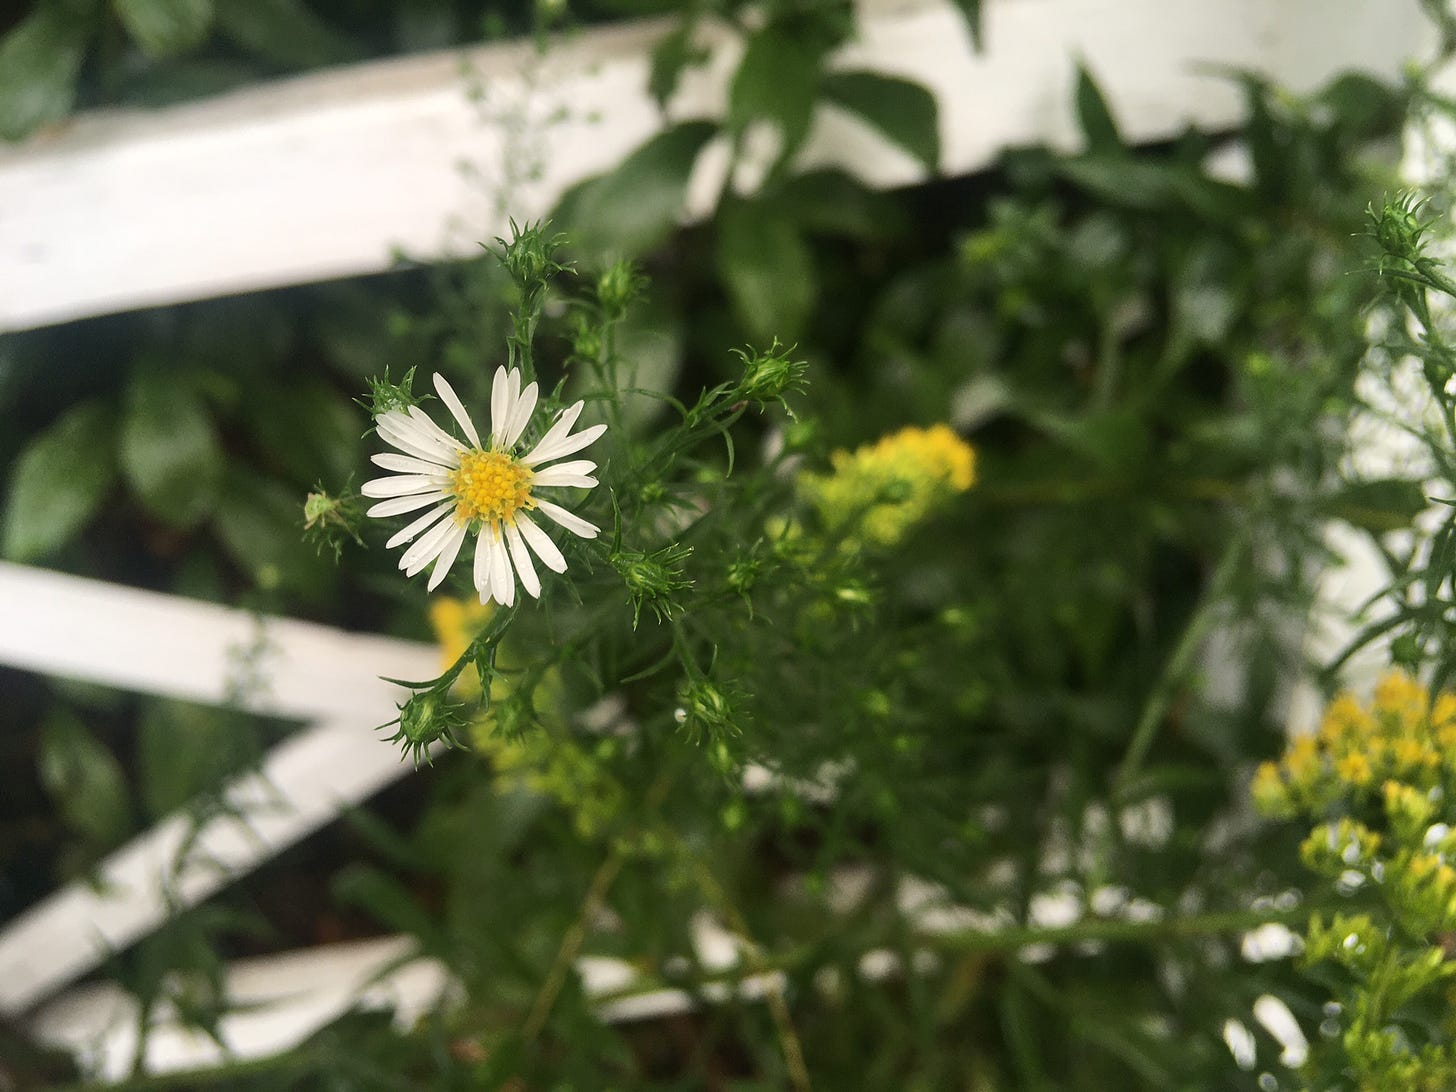 A small white aster with a yellow center and short, narrow white rays